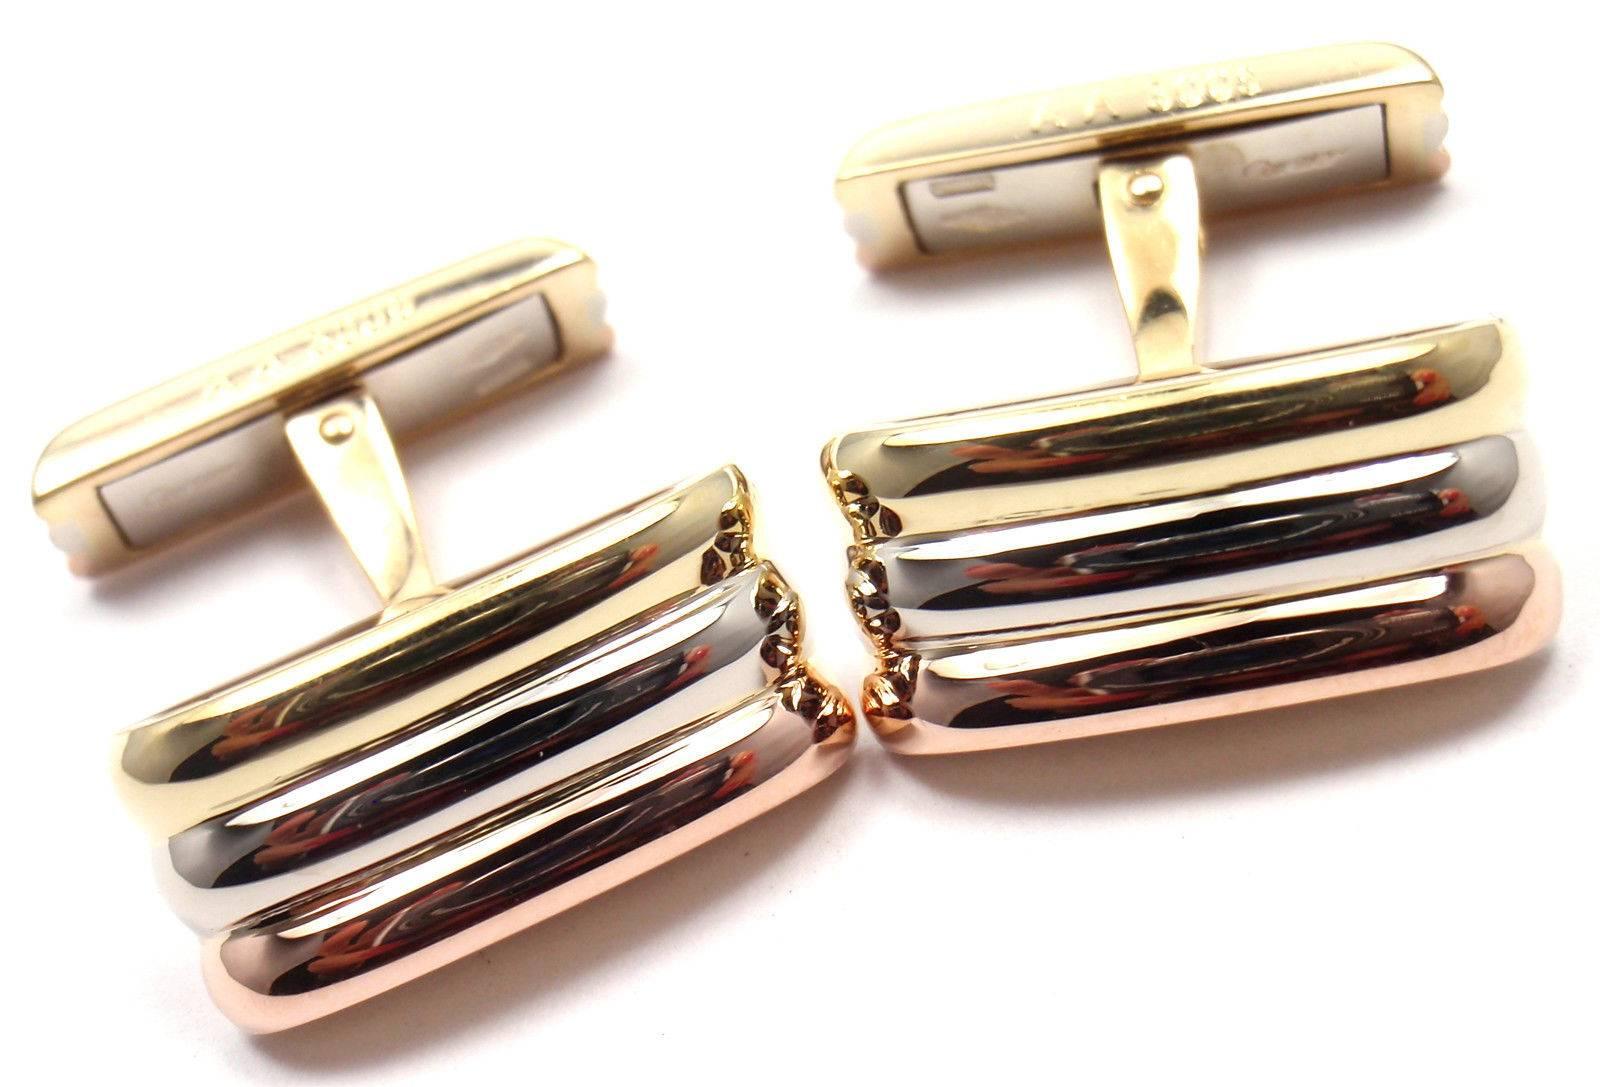 18k Tri-Color Gold Vintage Cufflinks by Cartier. 

Details: 
Measurements: 18mm x 17mm x 22mm
Weight: 15.1 grams
Stamped Hallmarks: Cartier 750 AA3009 1989
*Free Shipping within the United States*

Your Price: $3,000

T1017mmld